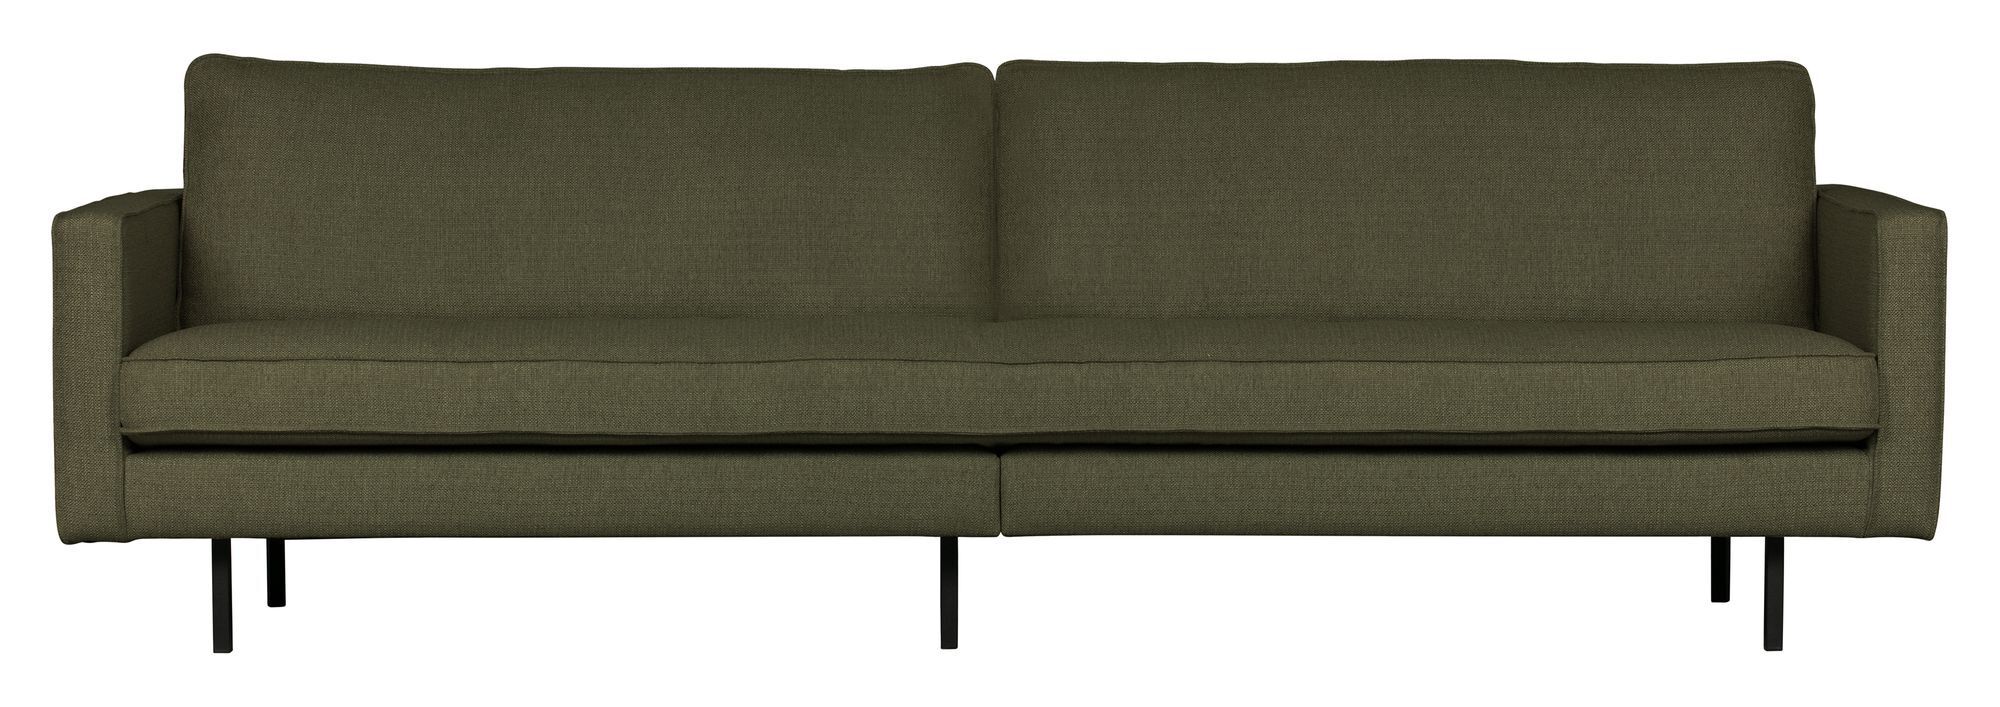 BePureHome Rodeo Stretched 3-pers. Sofa - Tea Leave   Unoliving